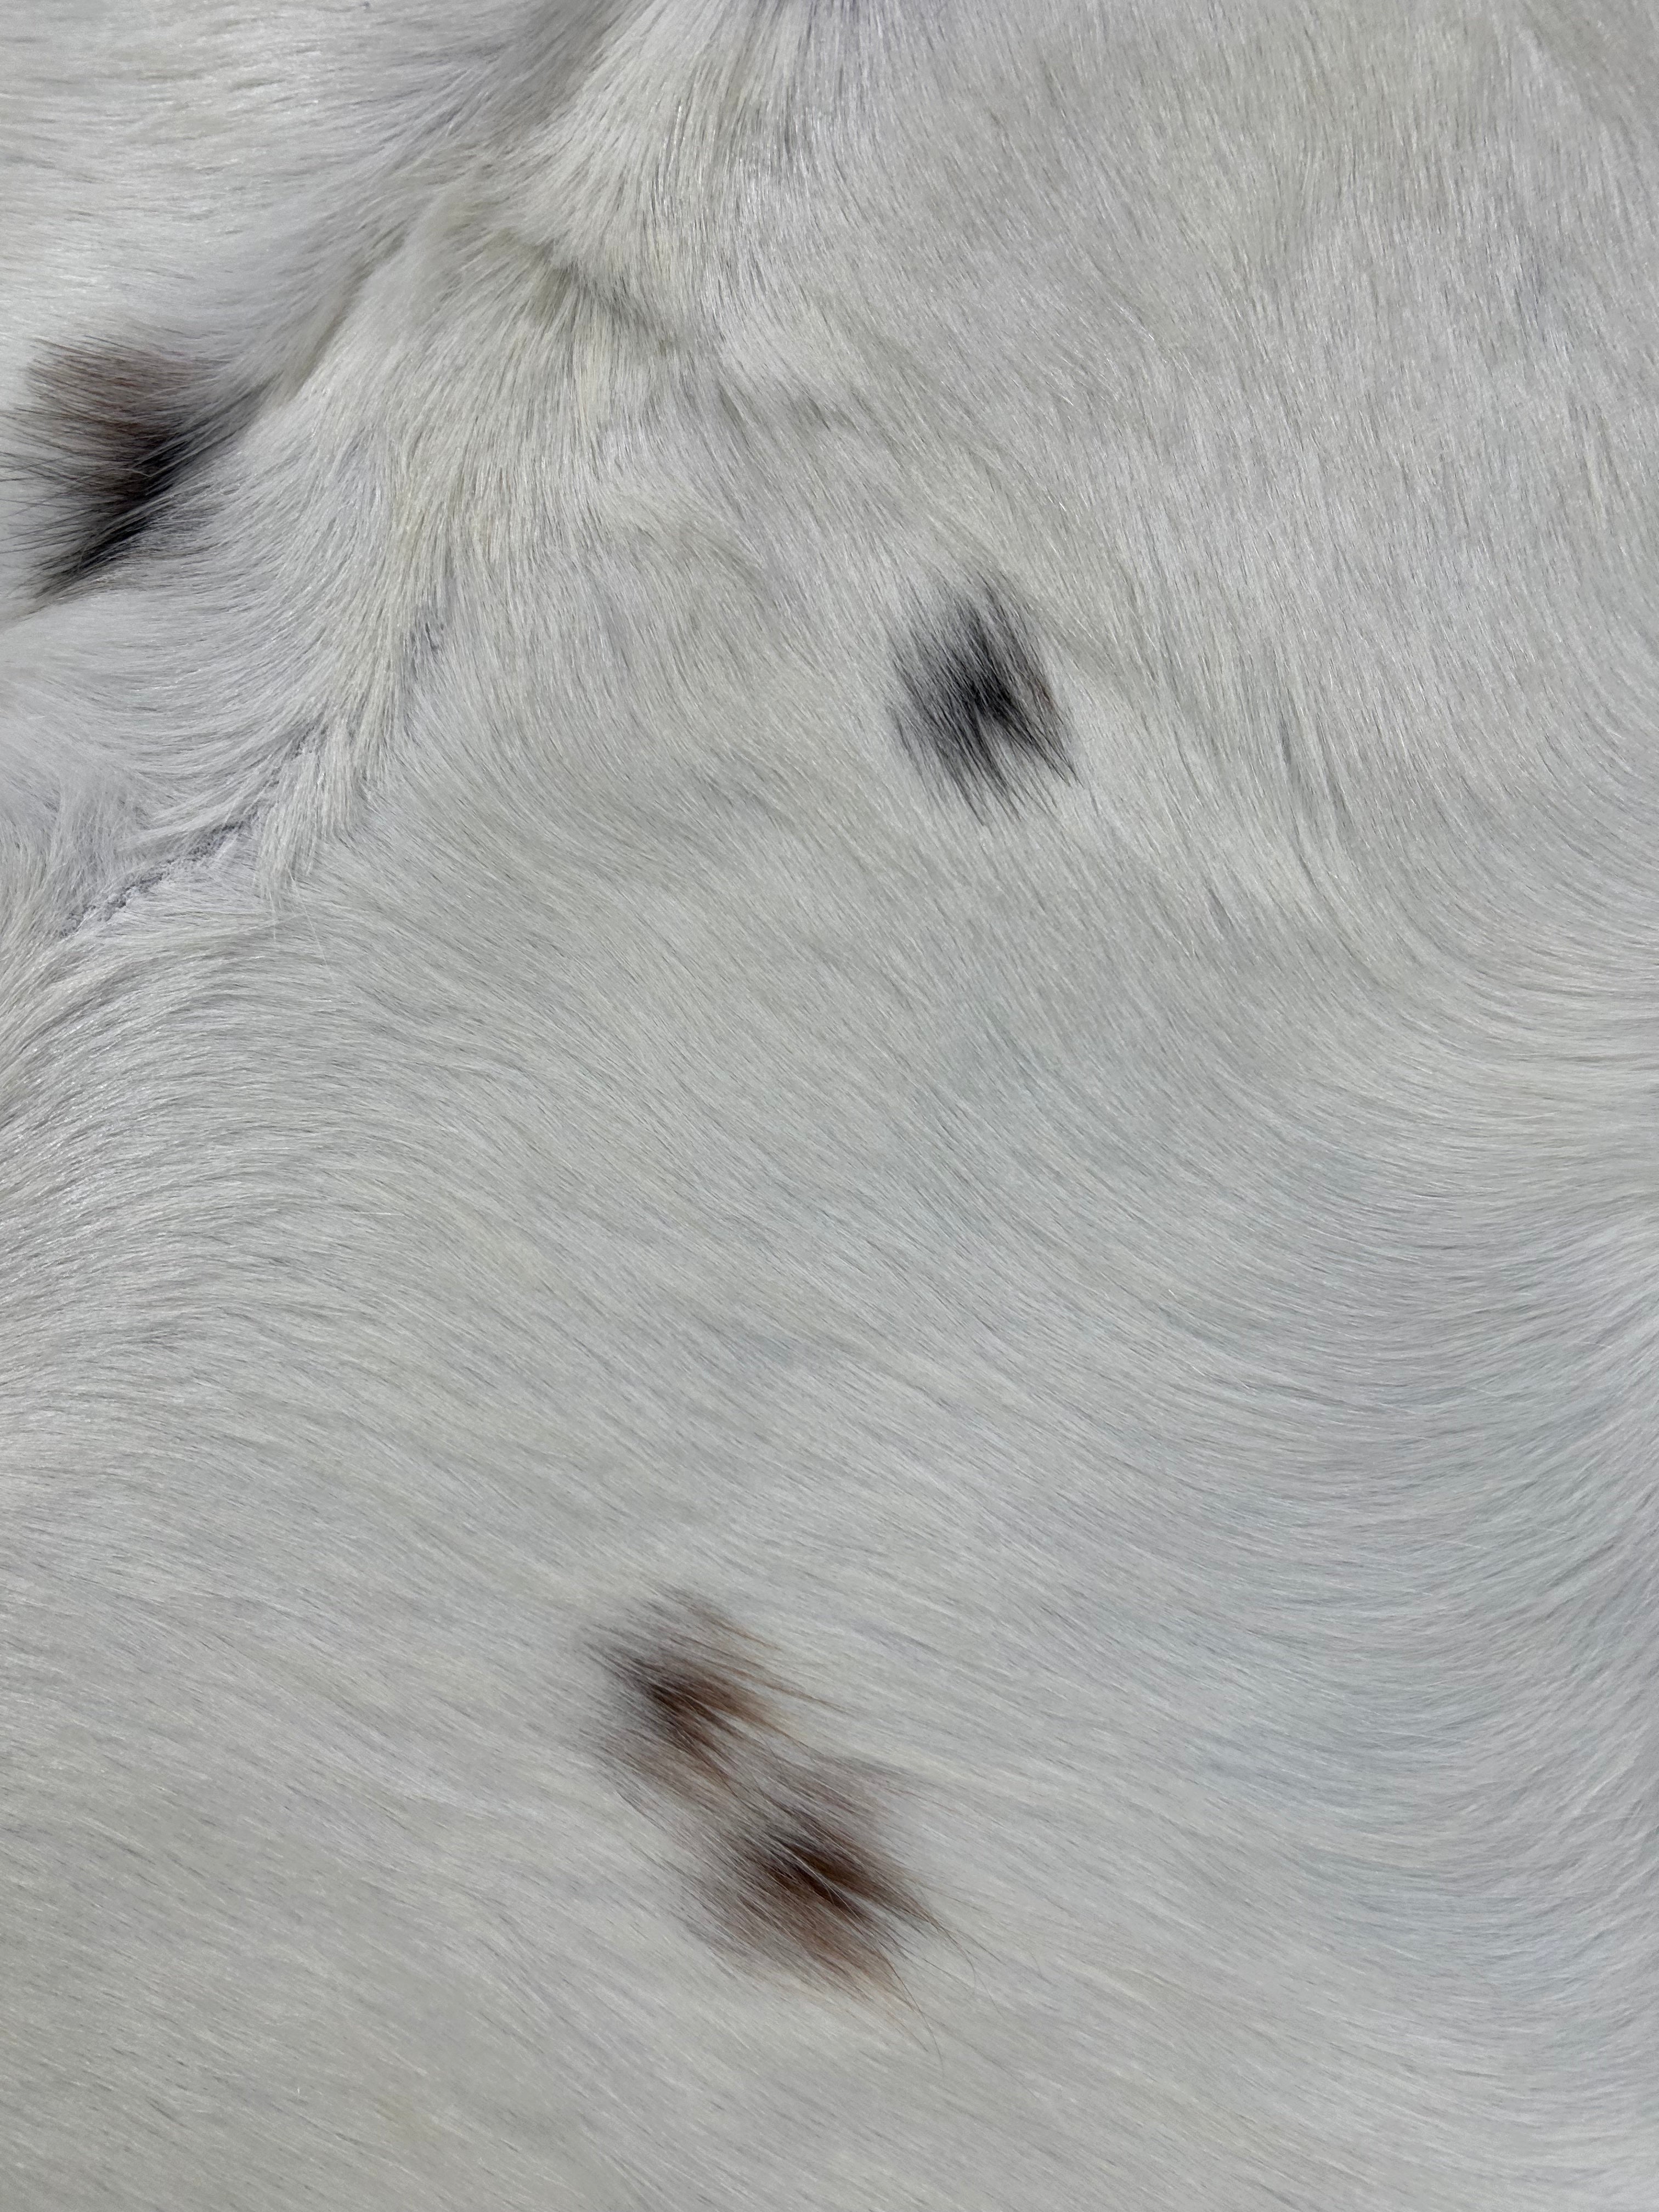 Solid White Cowhide Rug with a few spots Size: 7x6.5 feet M-1680